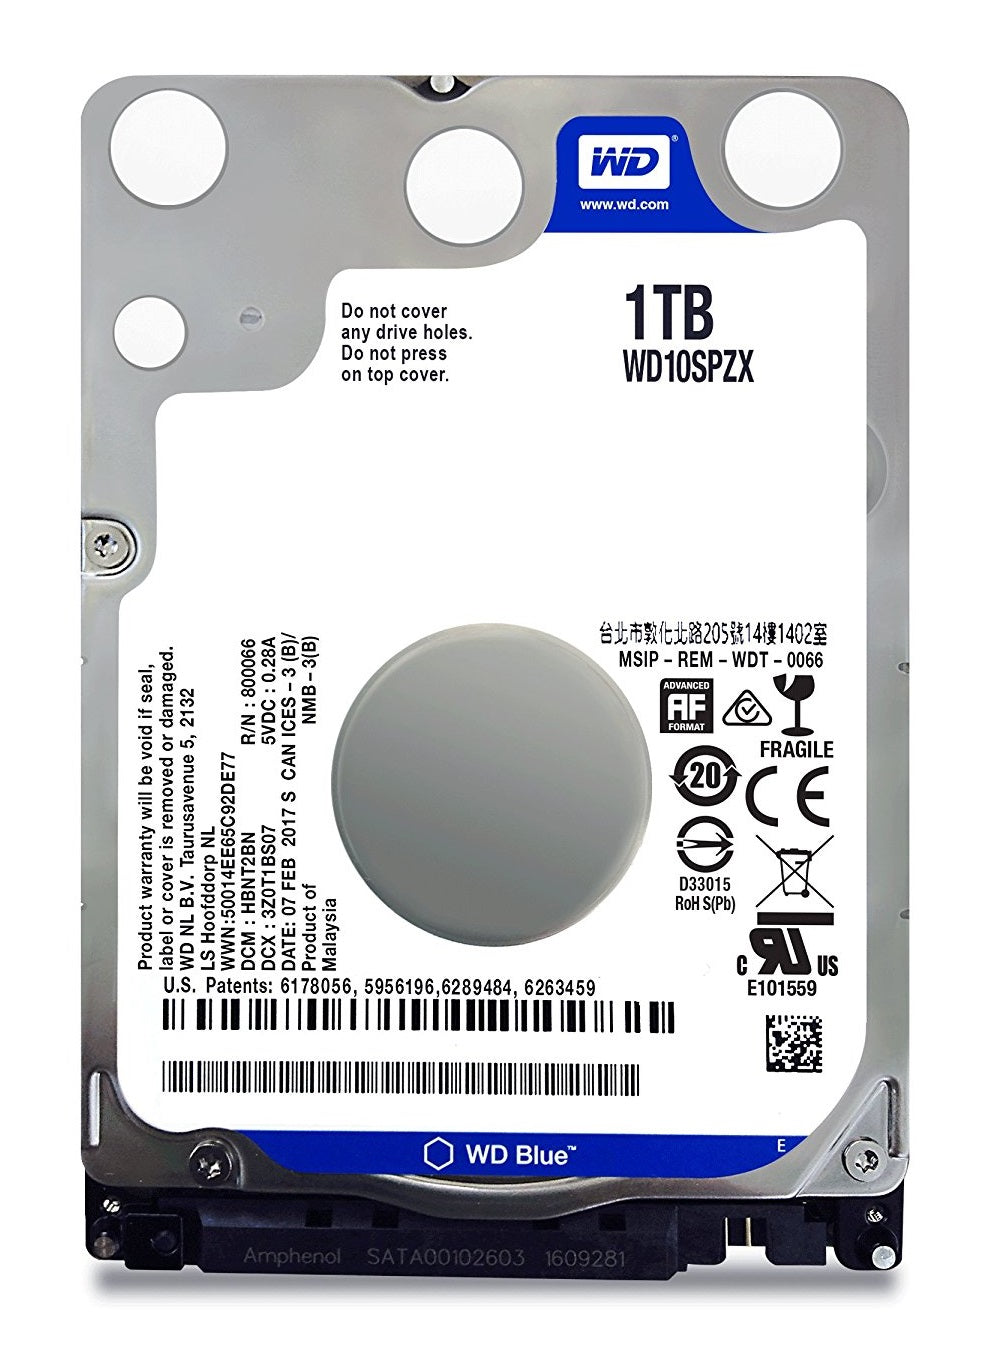 WD Blue 1TB Mobile Hard Disk Drive - 5400 RPM SATA 6 Gb/s 128MB Cache 2.5 inch - WD10SPZX (Renewed)